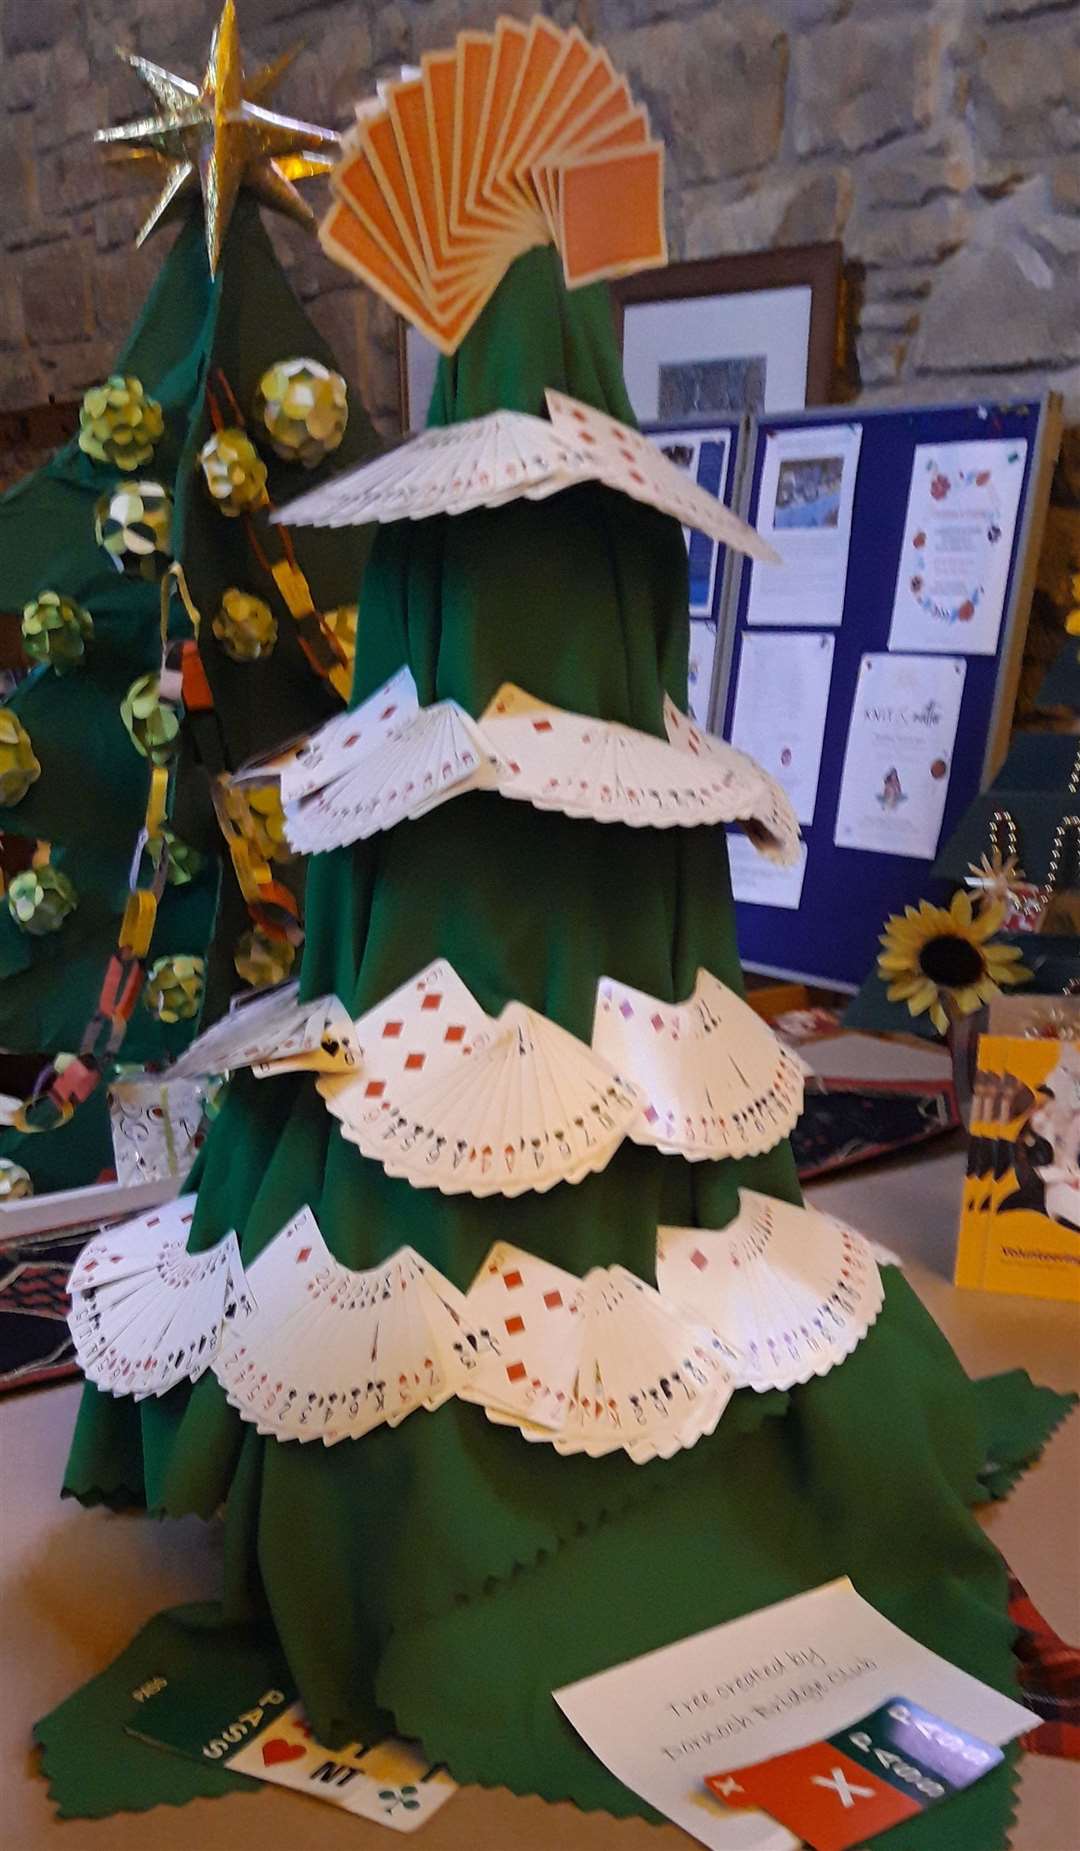 Playing cards feature heavily on the Bridge Club's tree.